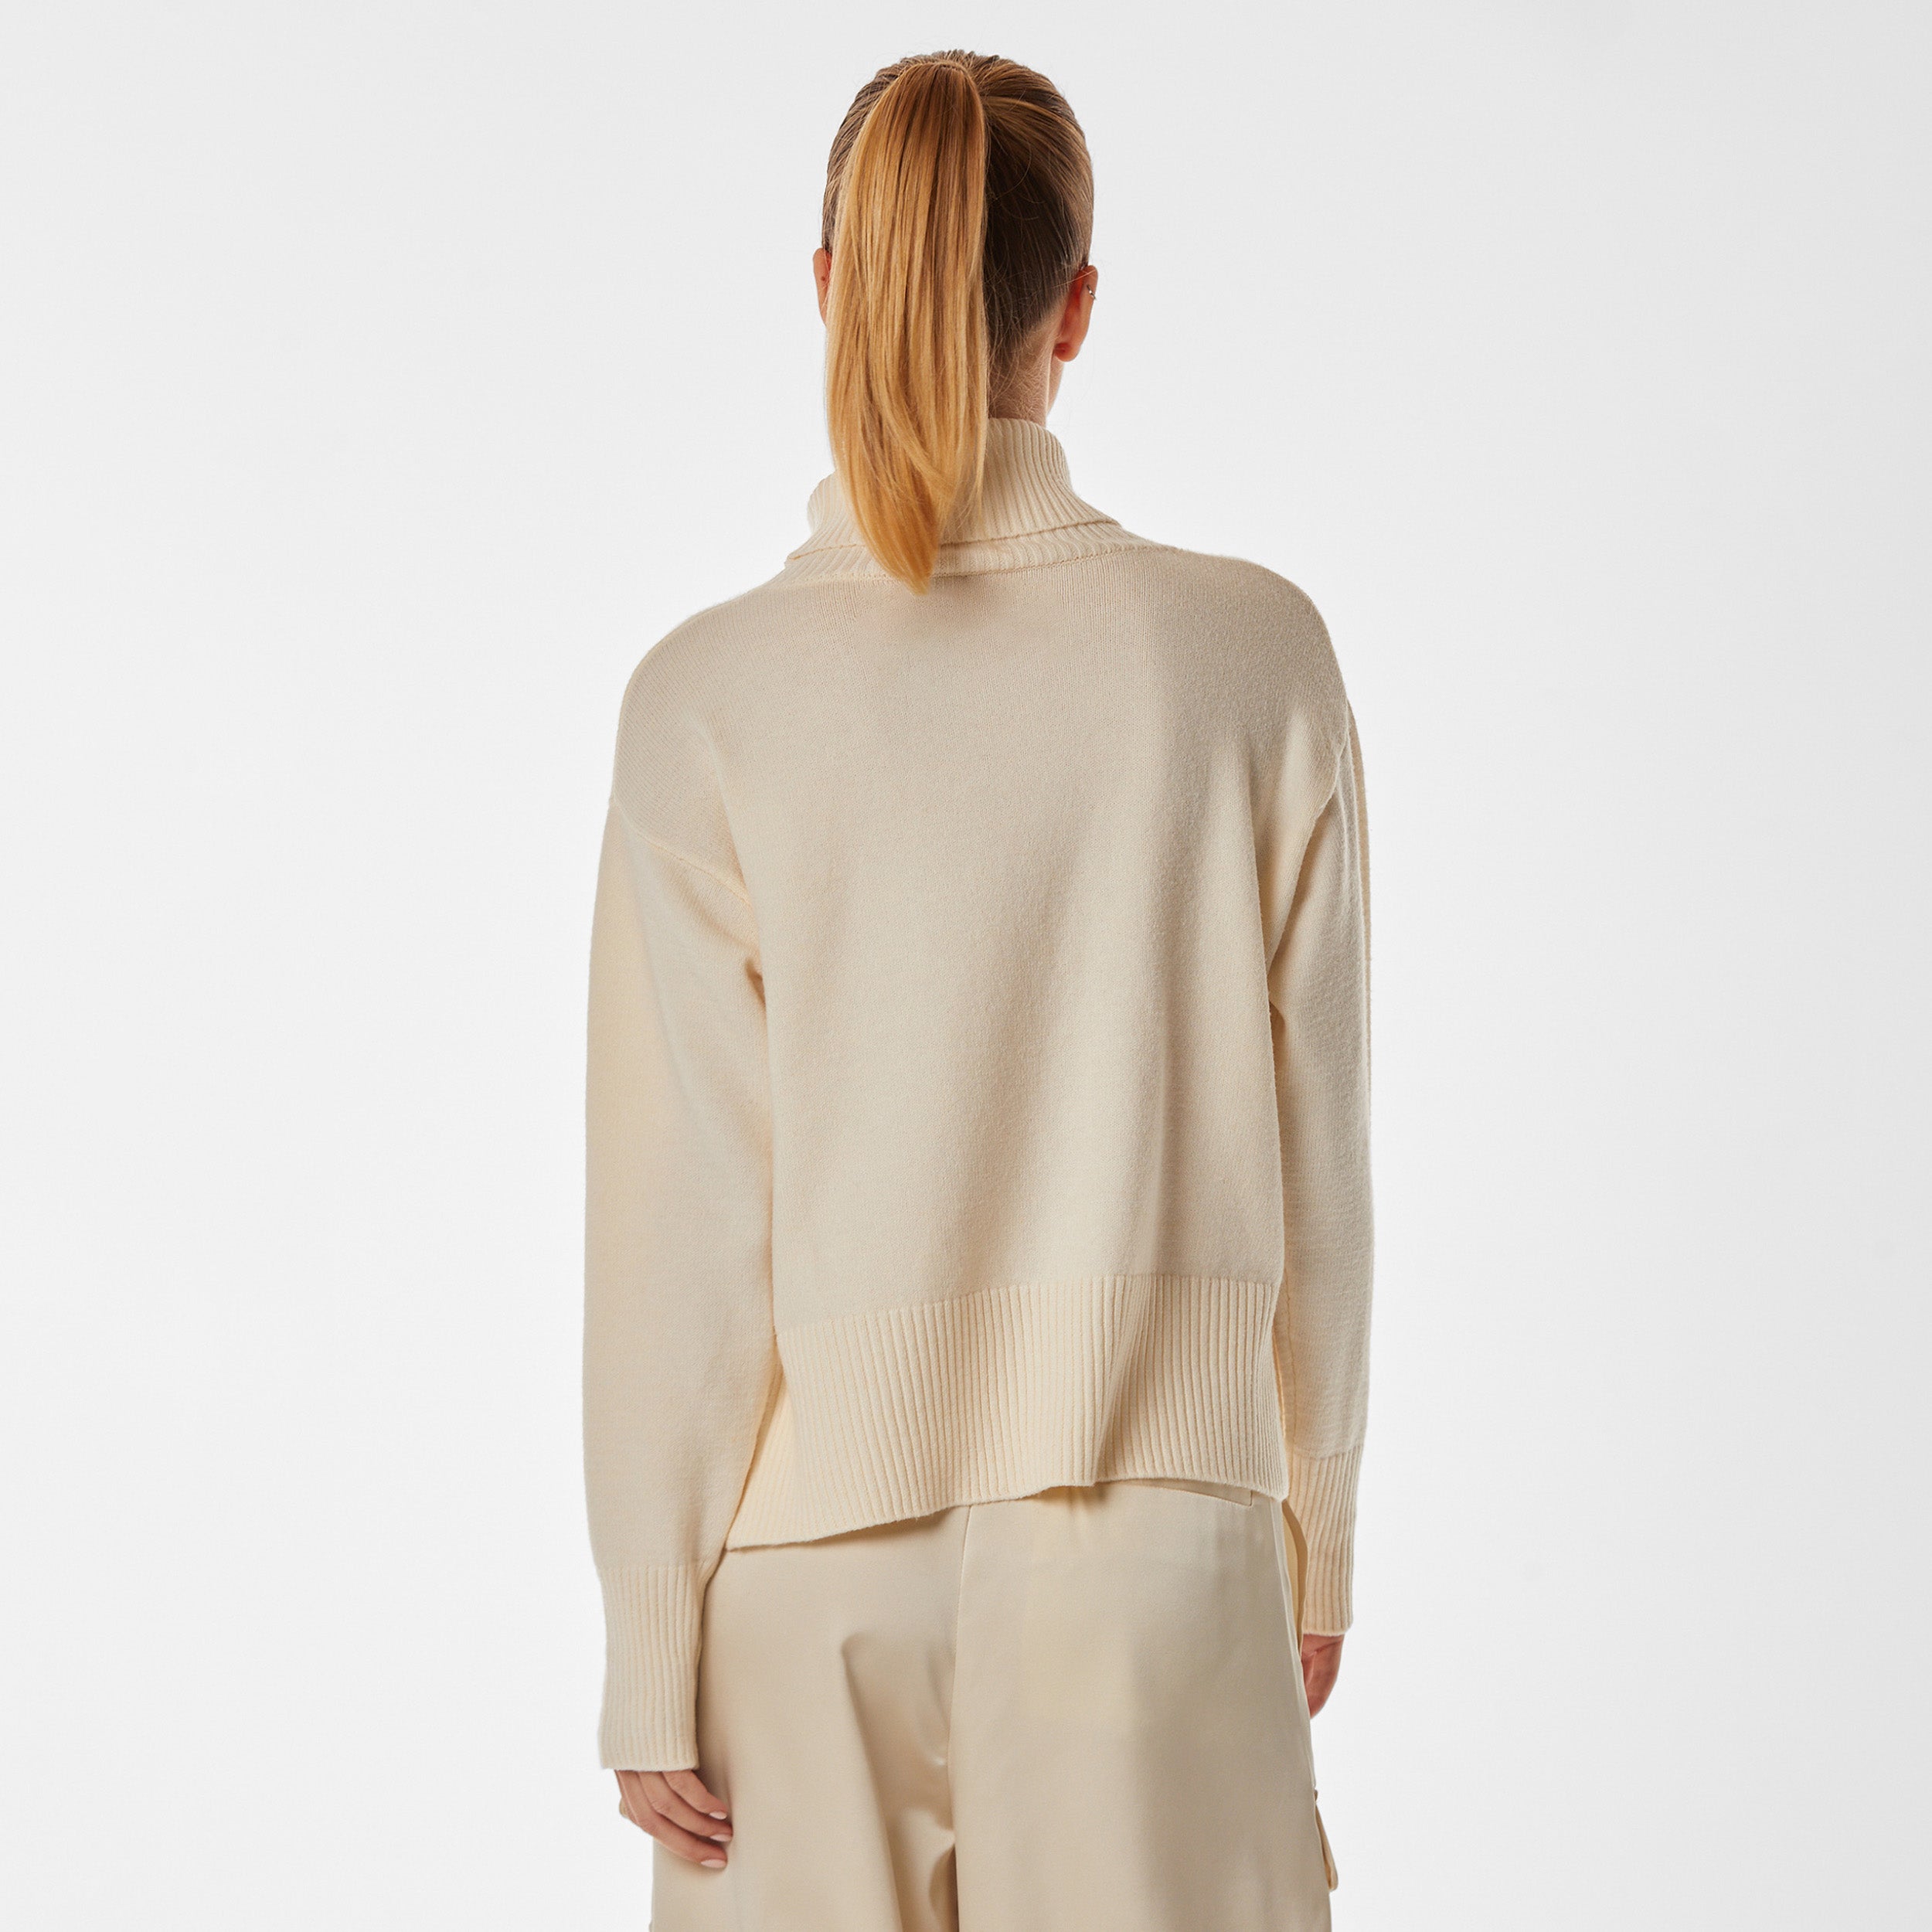 Rear view of woman wearing pearl colored oversized sweater